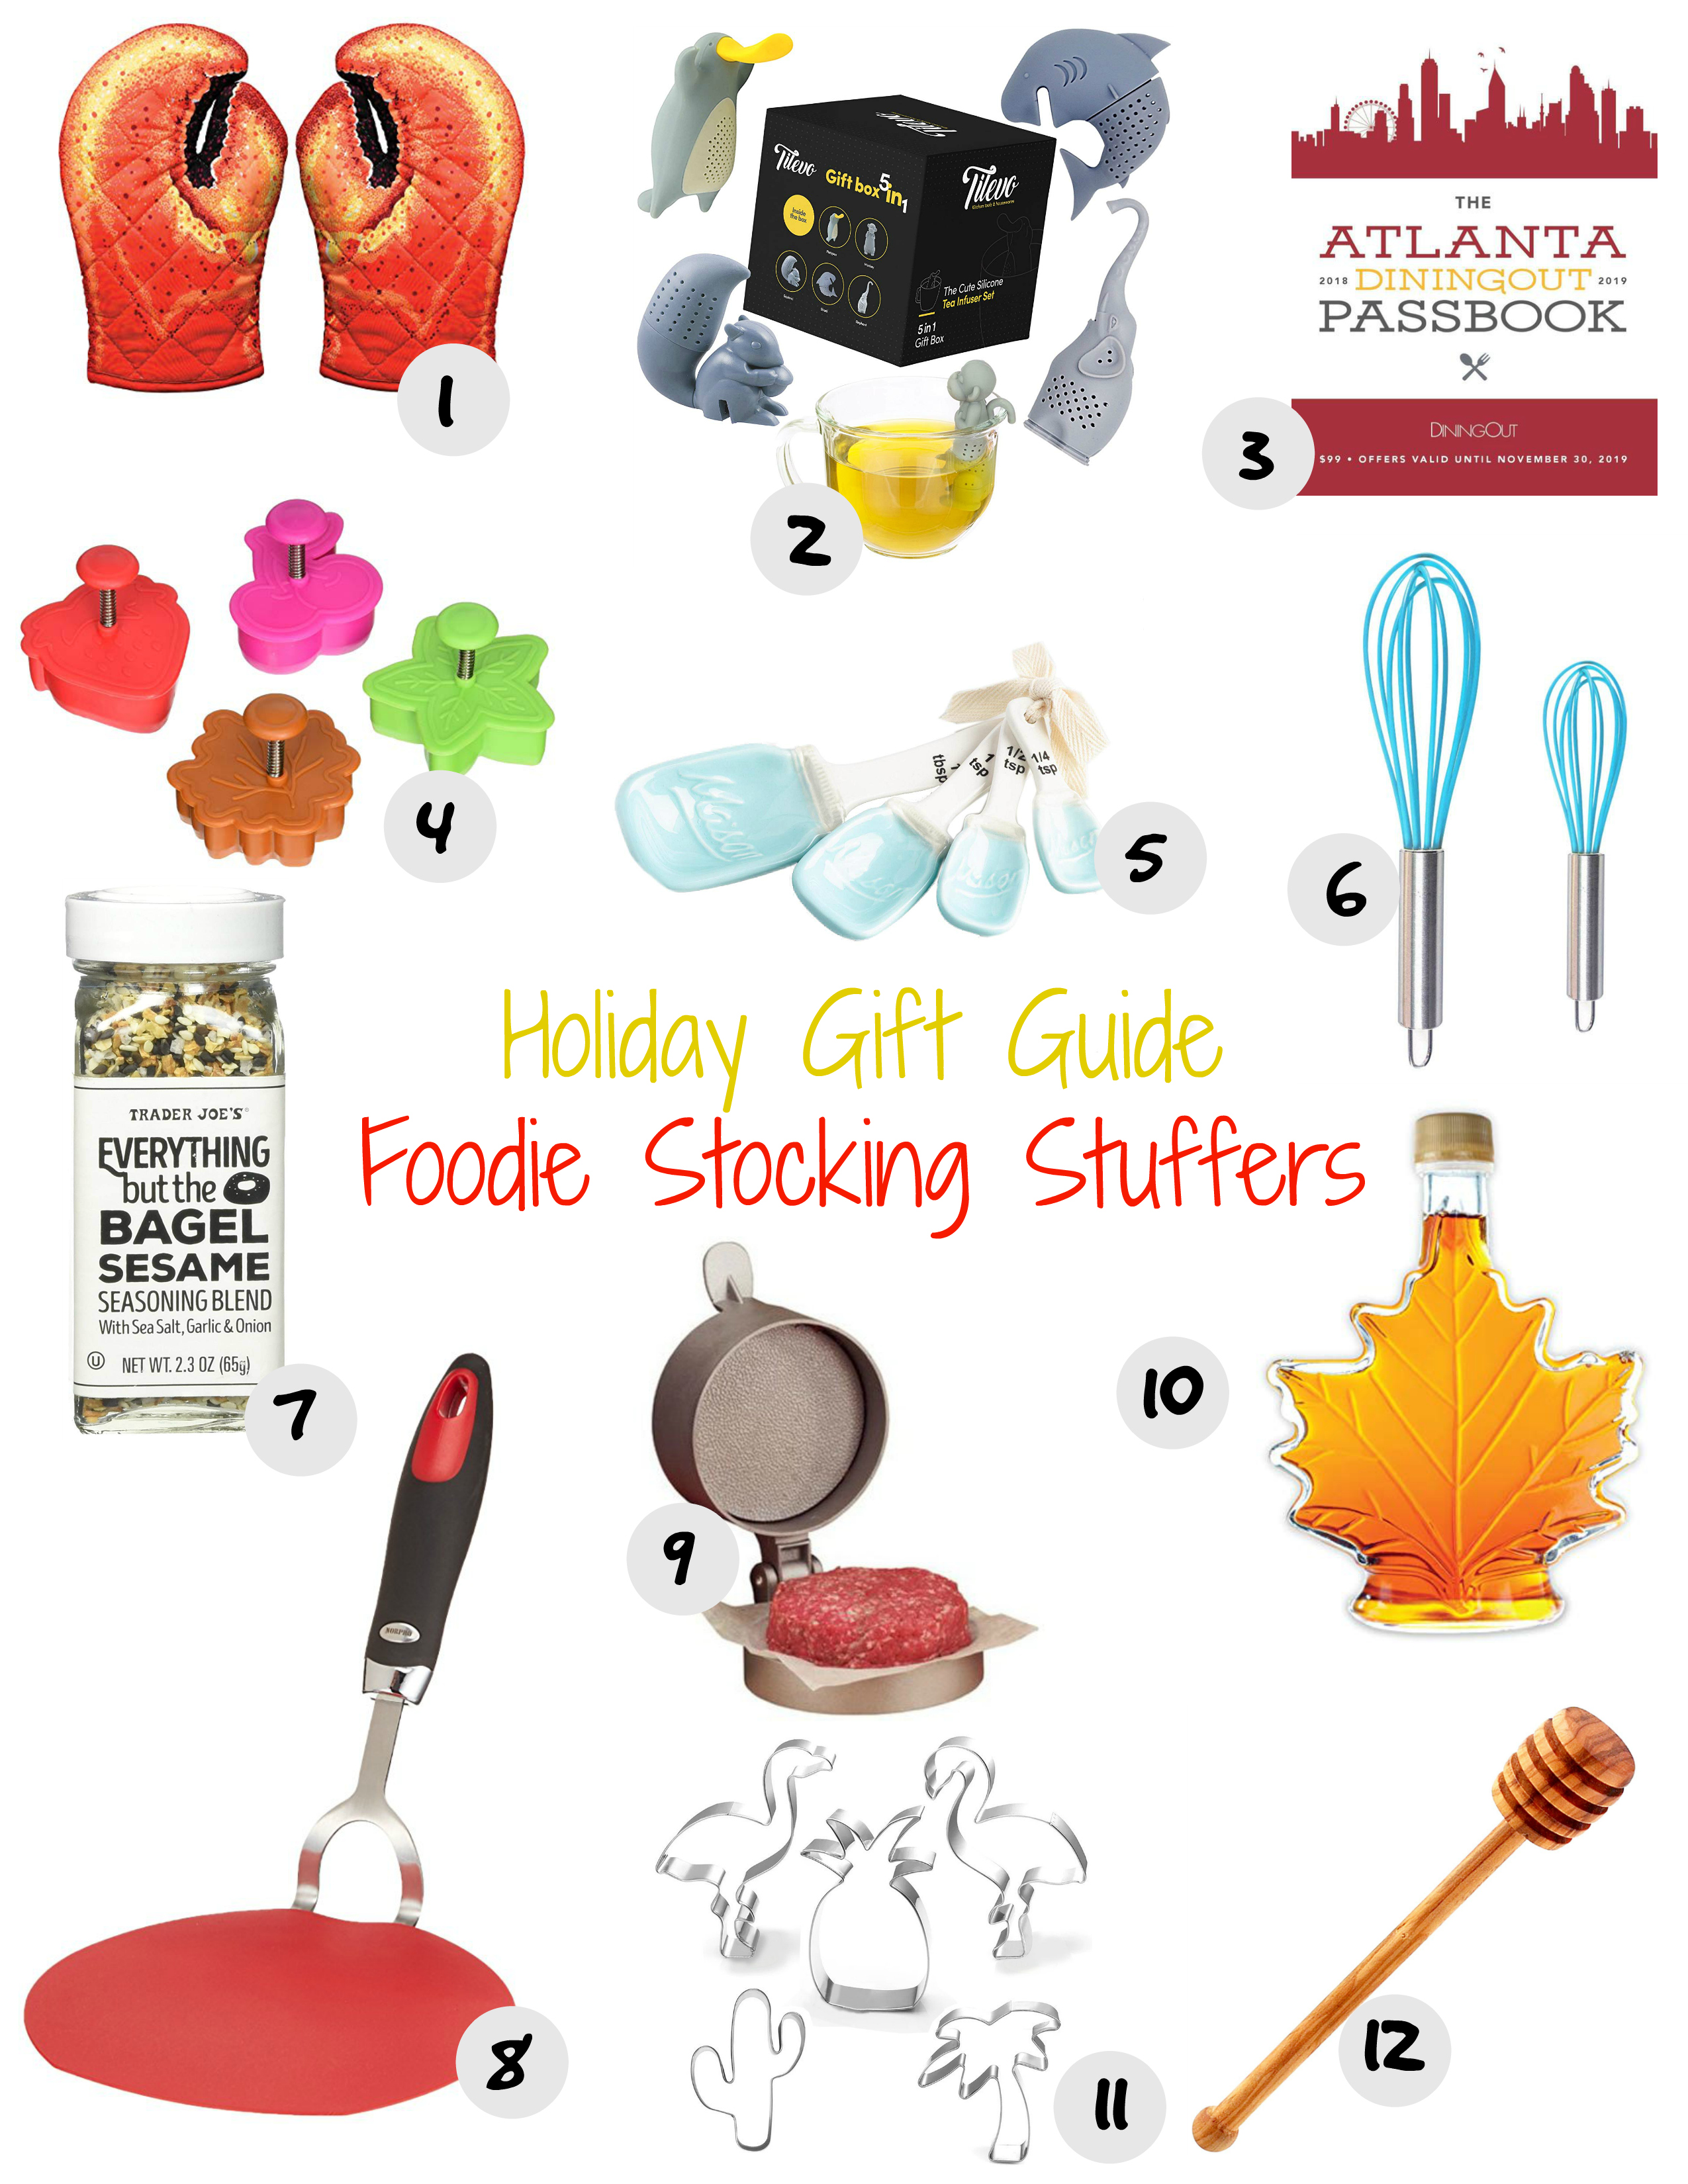 Holiday Gift Guide: Foodie Stocking Stuffers